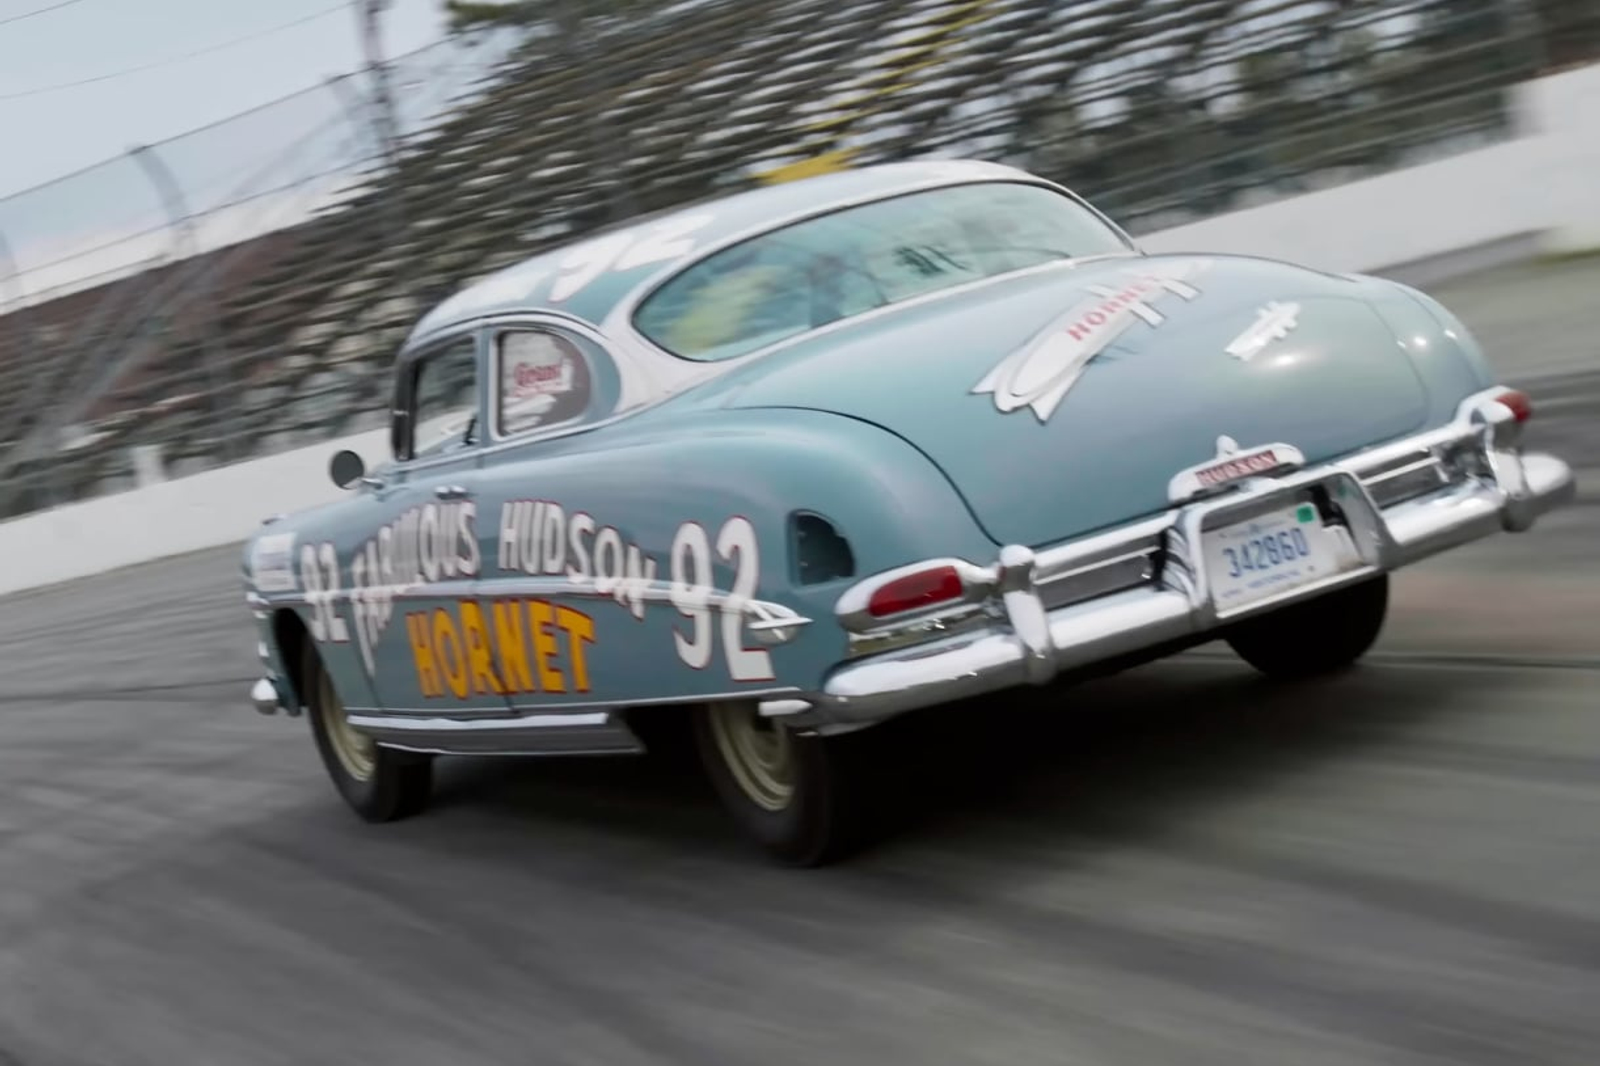 video, motorsport, the story behind the fabulous hudson hornet that inspired doc hudson from cars